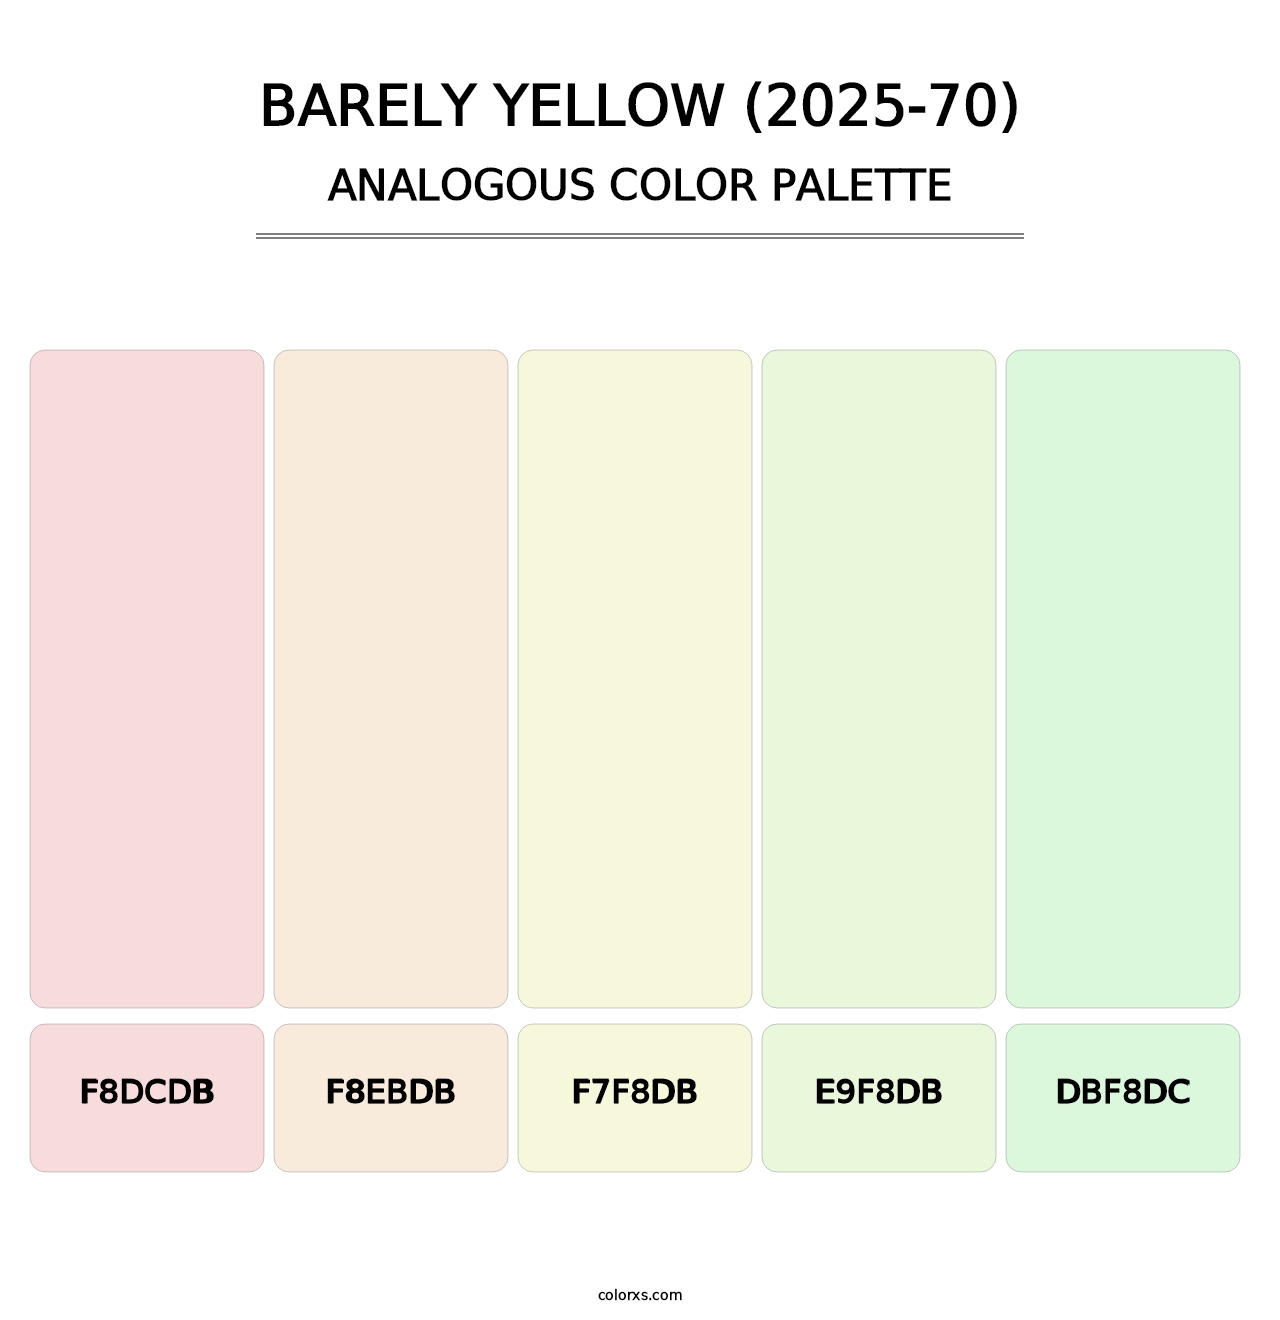 Barely Yellow (2025-70) - Analogous Color Palette